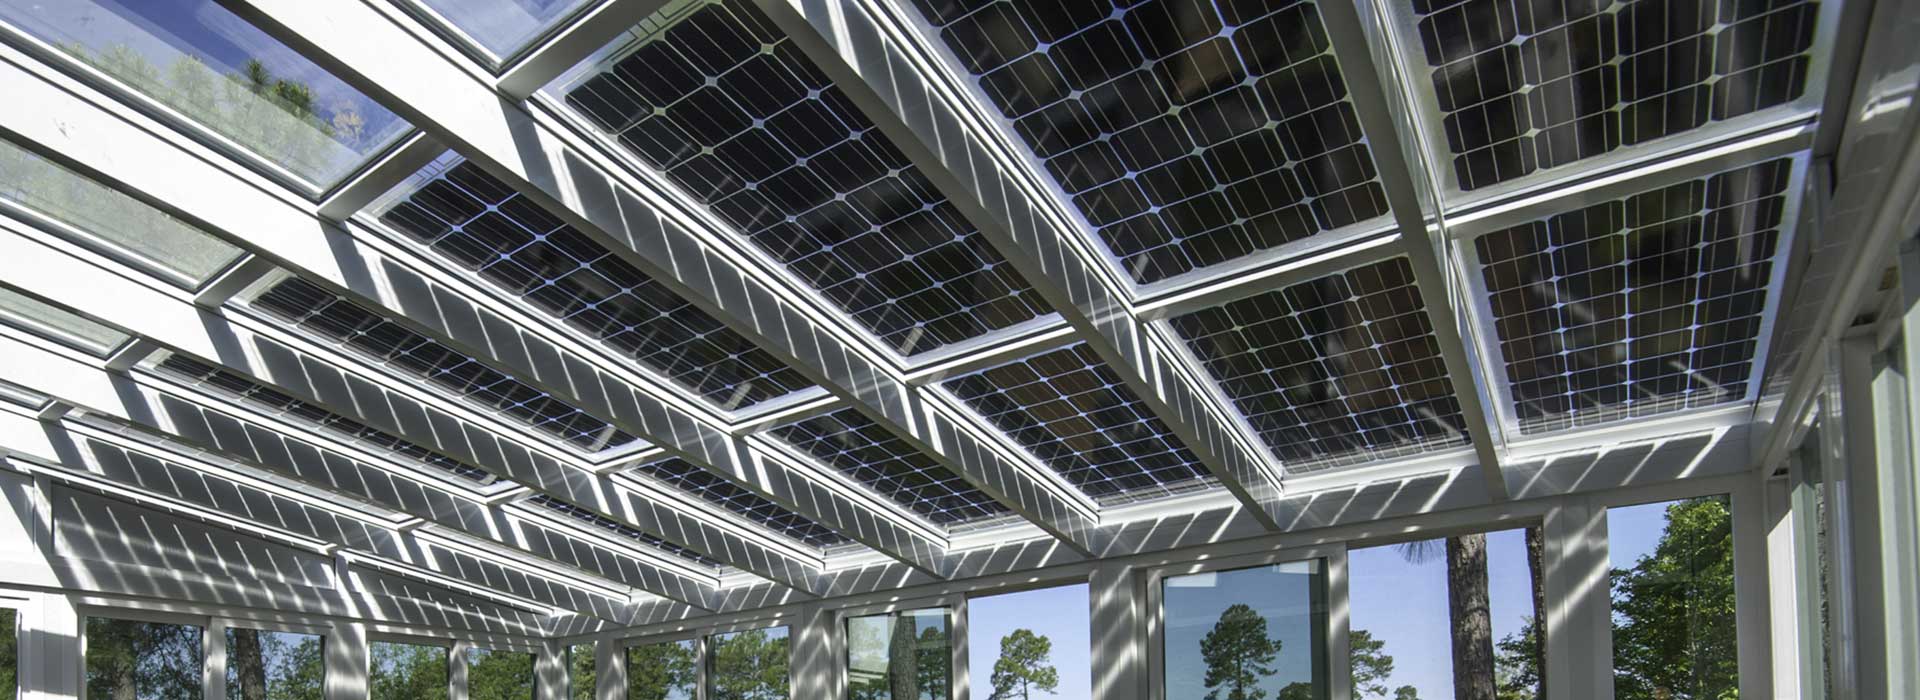 Aluminium roofing with photovoltaic panels